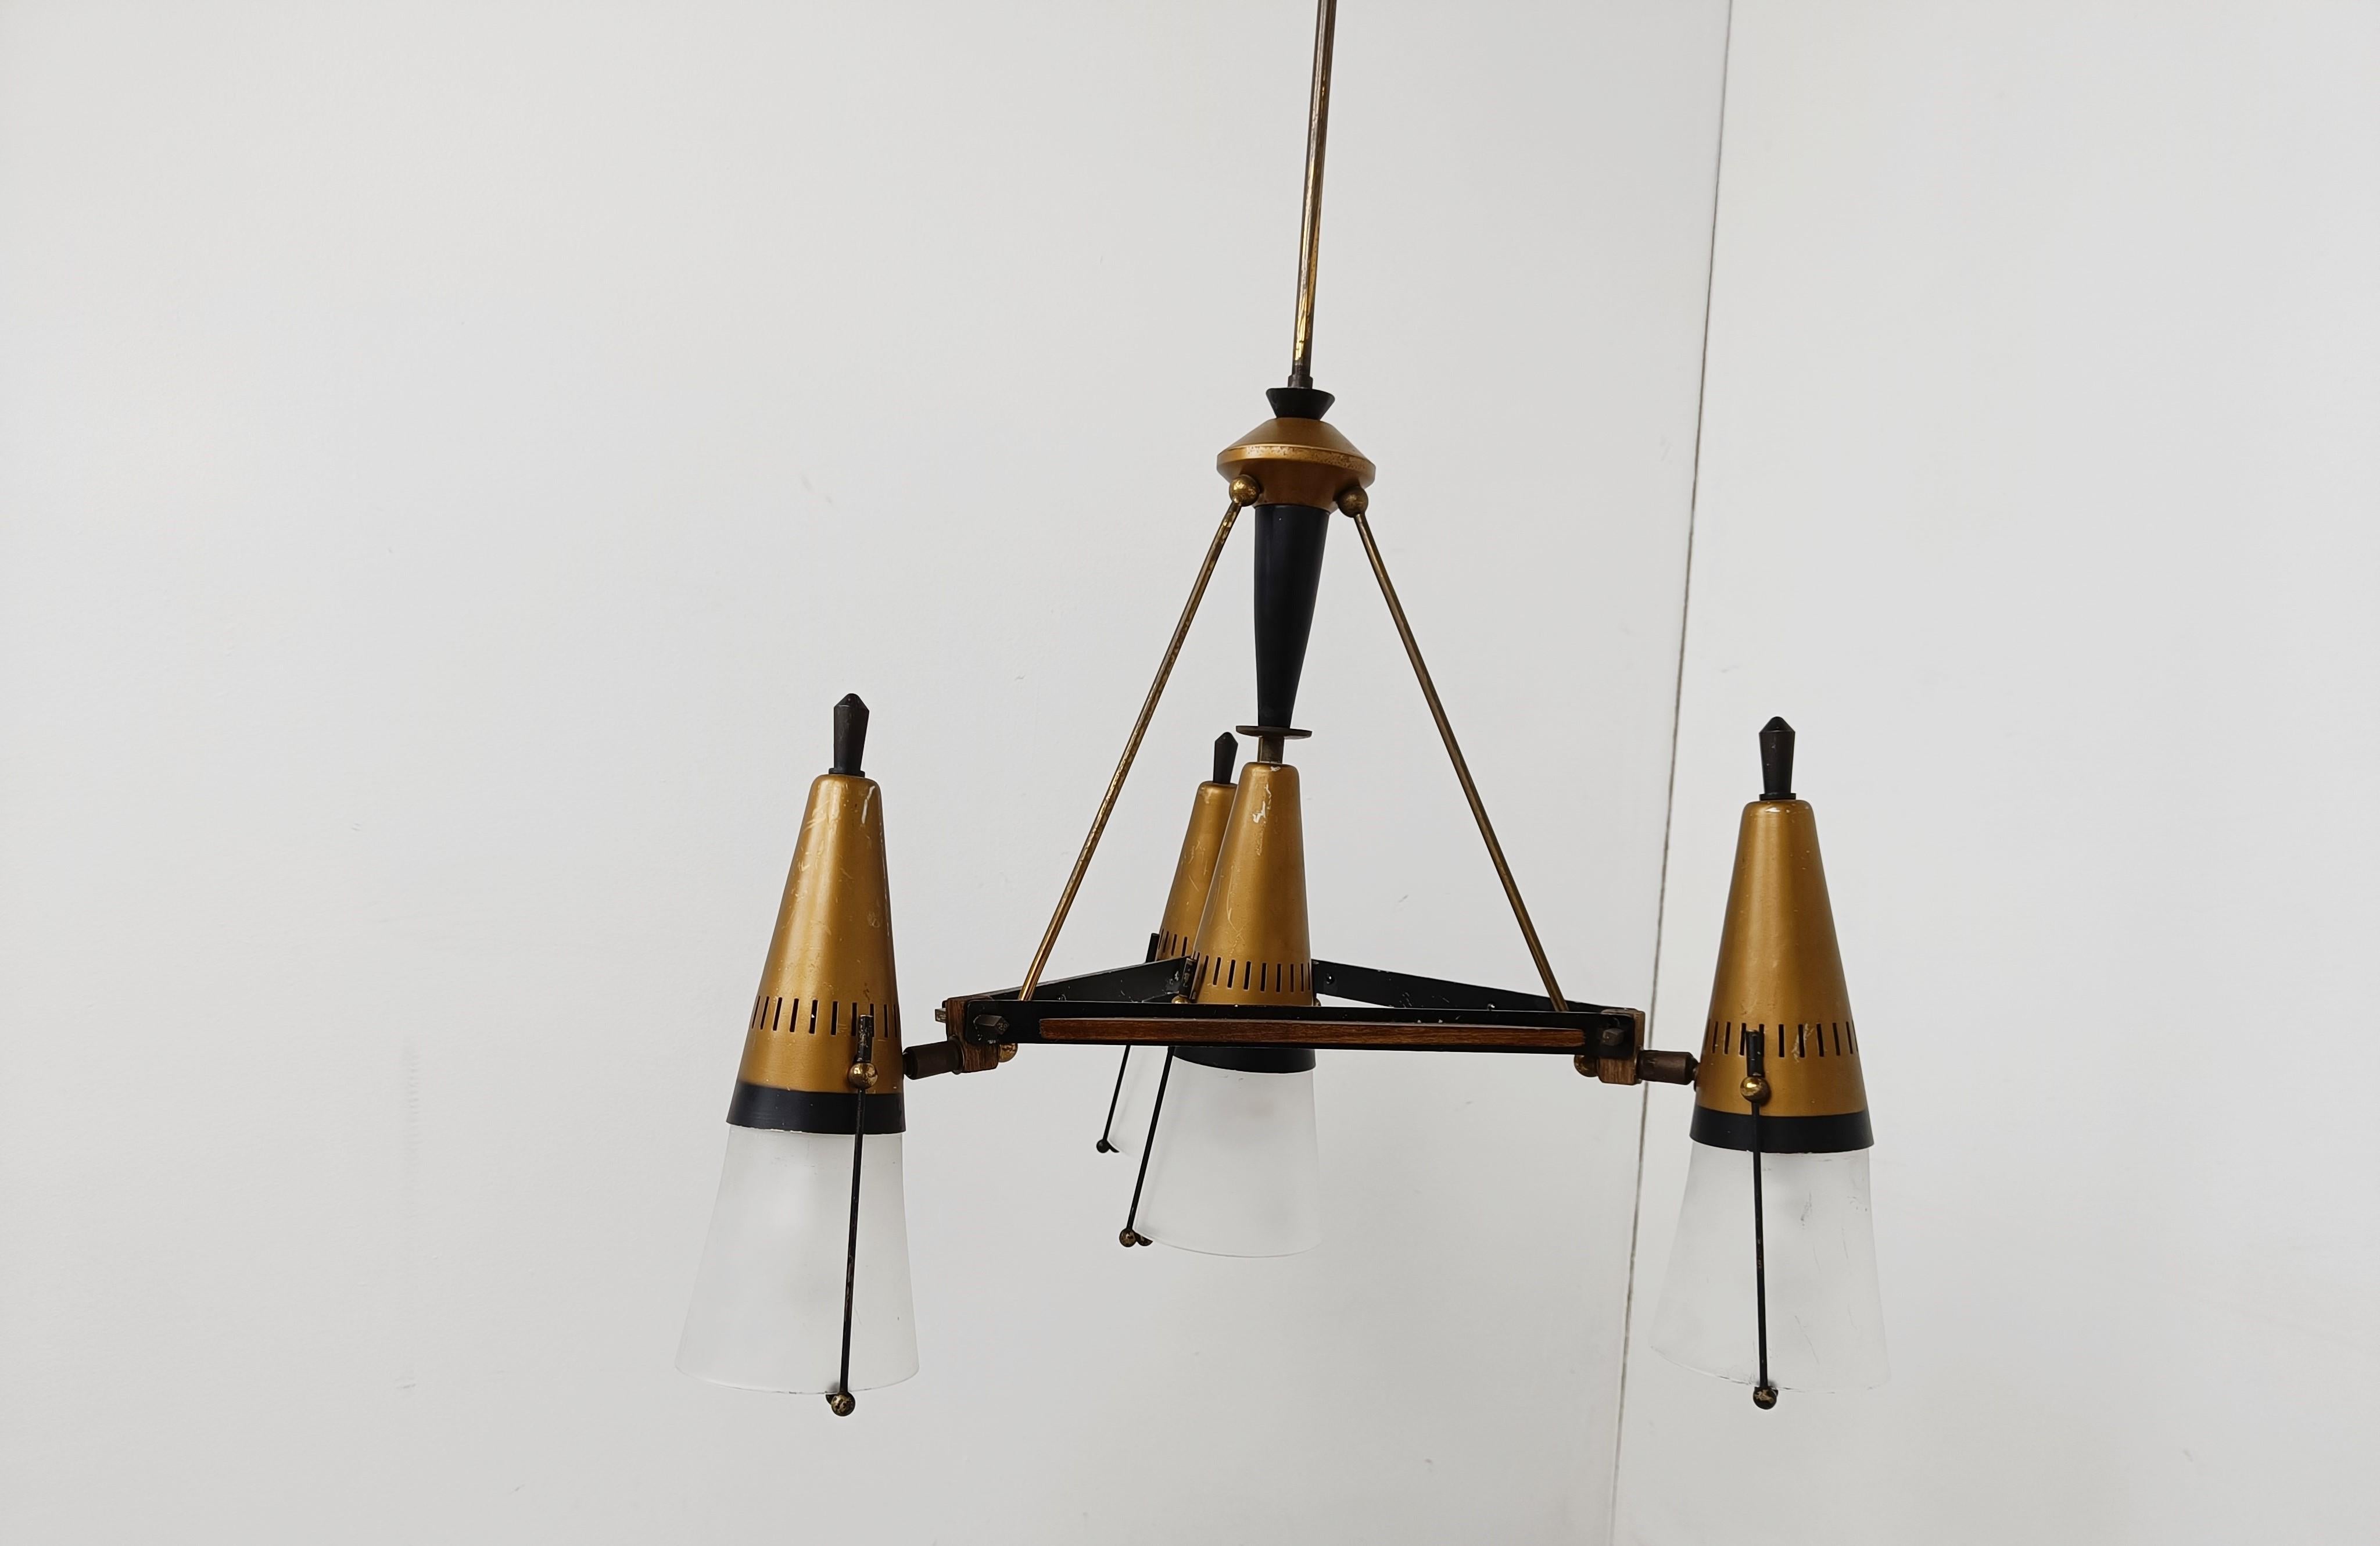 Mid century cone shaped chandelier by Oscar Torlasco. 

The chandelier has a triangular brass and wooden frame with brass cone shaped shade holders and matte white glasses.

Beautiful mid century design with the right patina.

1950s - Italy

Tested